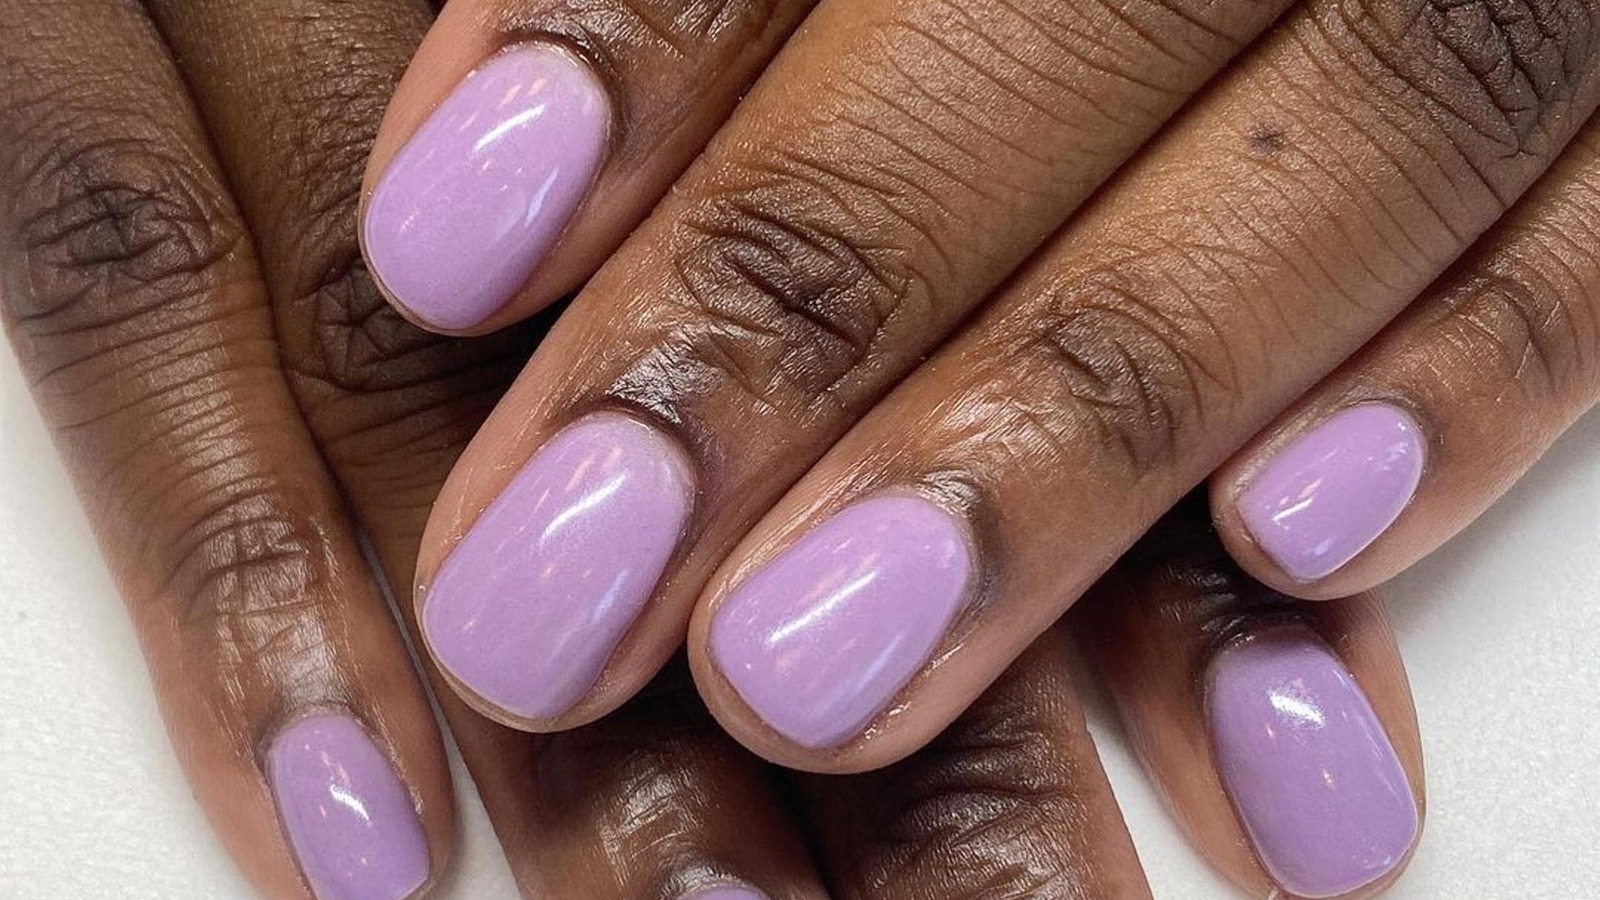 Lavender Nails Are In And These Are The Hottest Purple Looks